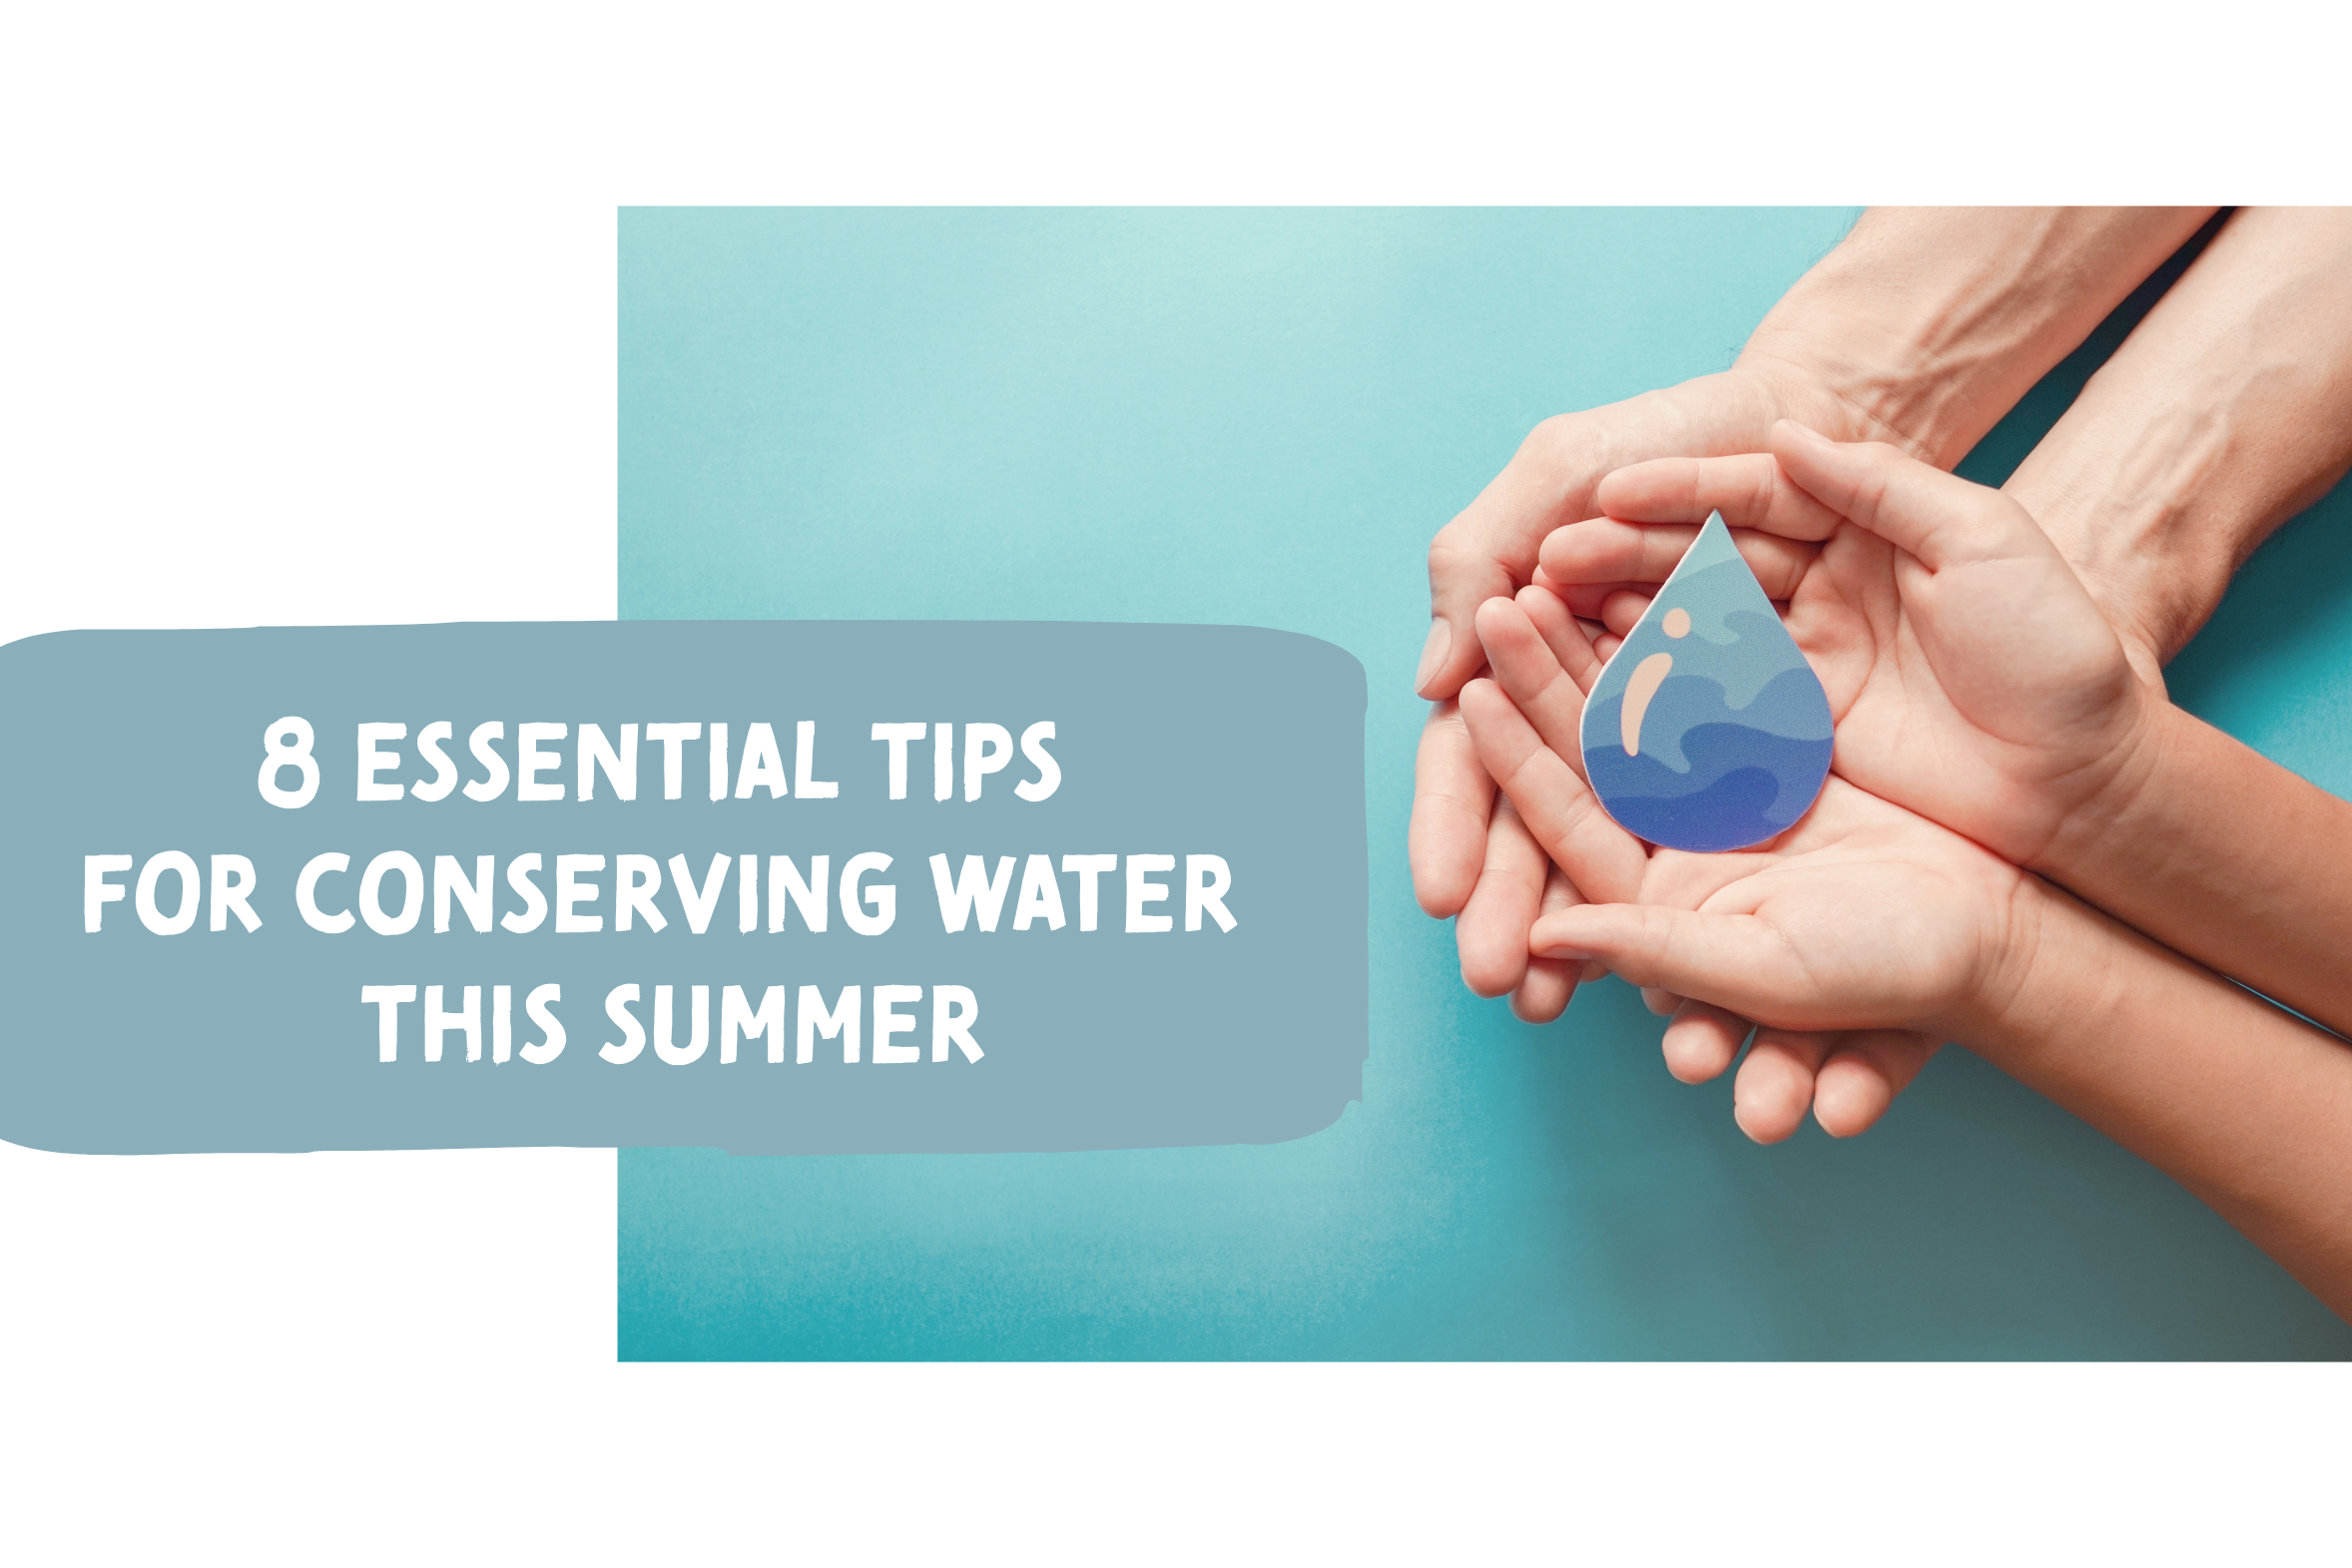 Blog on how to practice water conservation in the summer.